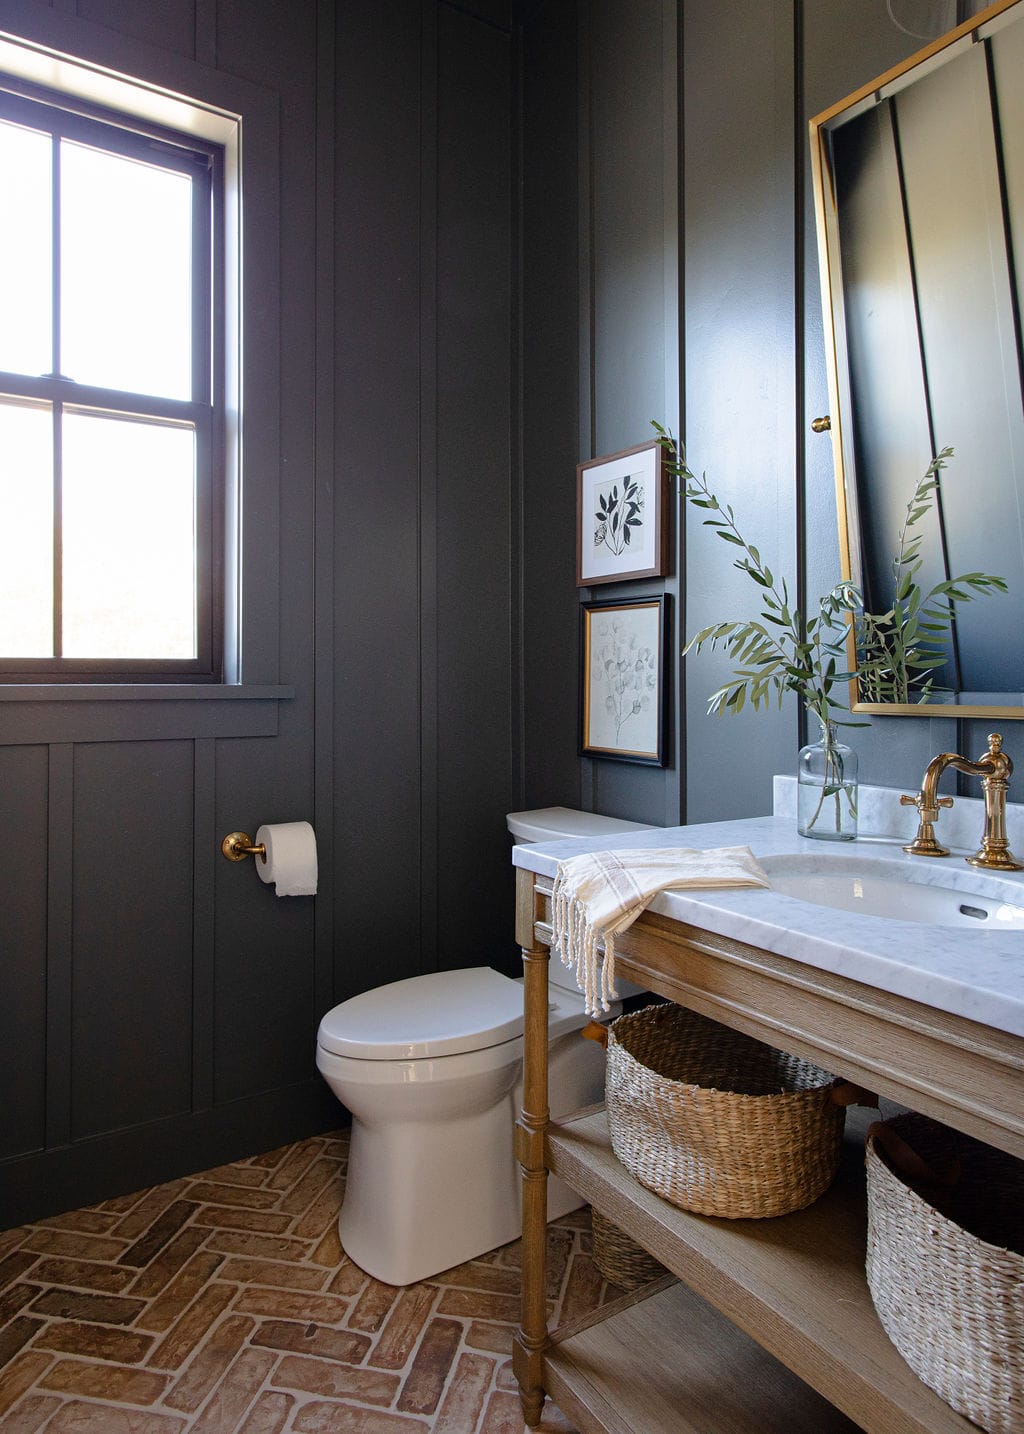 dark black wall paneling with a wood vanity cabinet and farmhouse style sink, gold faucet and mirror